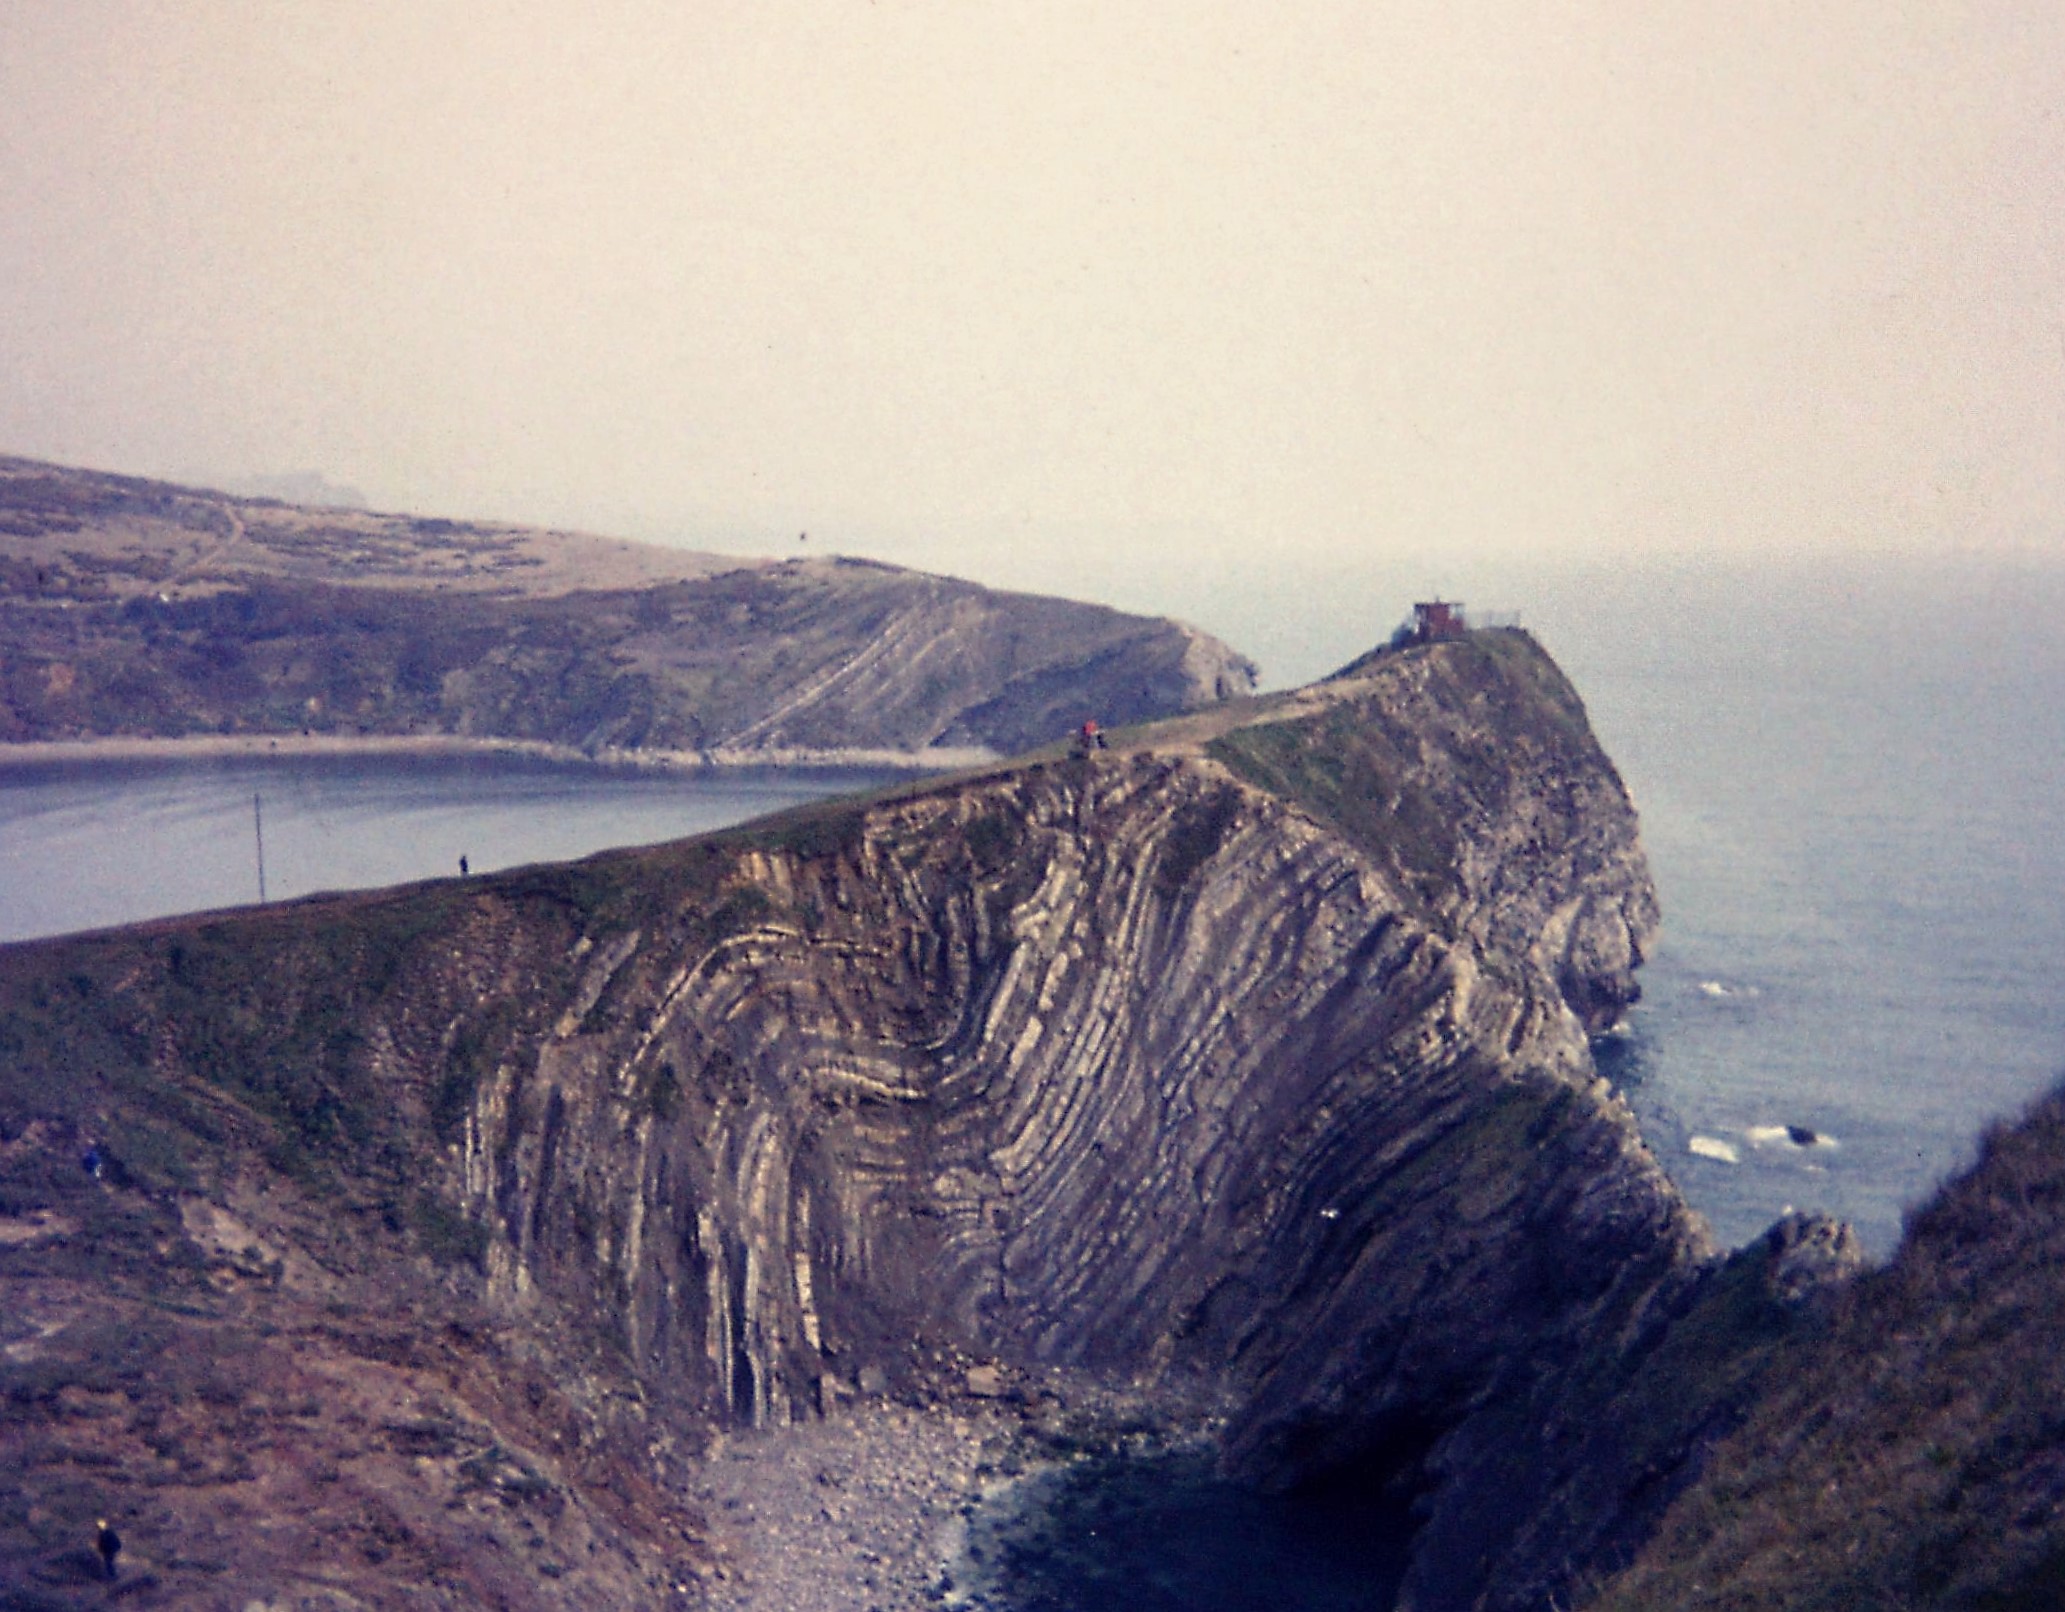 1975.04.06 Dorset3. Stair Hole & Lulworth Cove. Purbeck Group